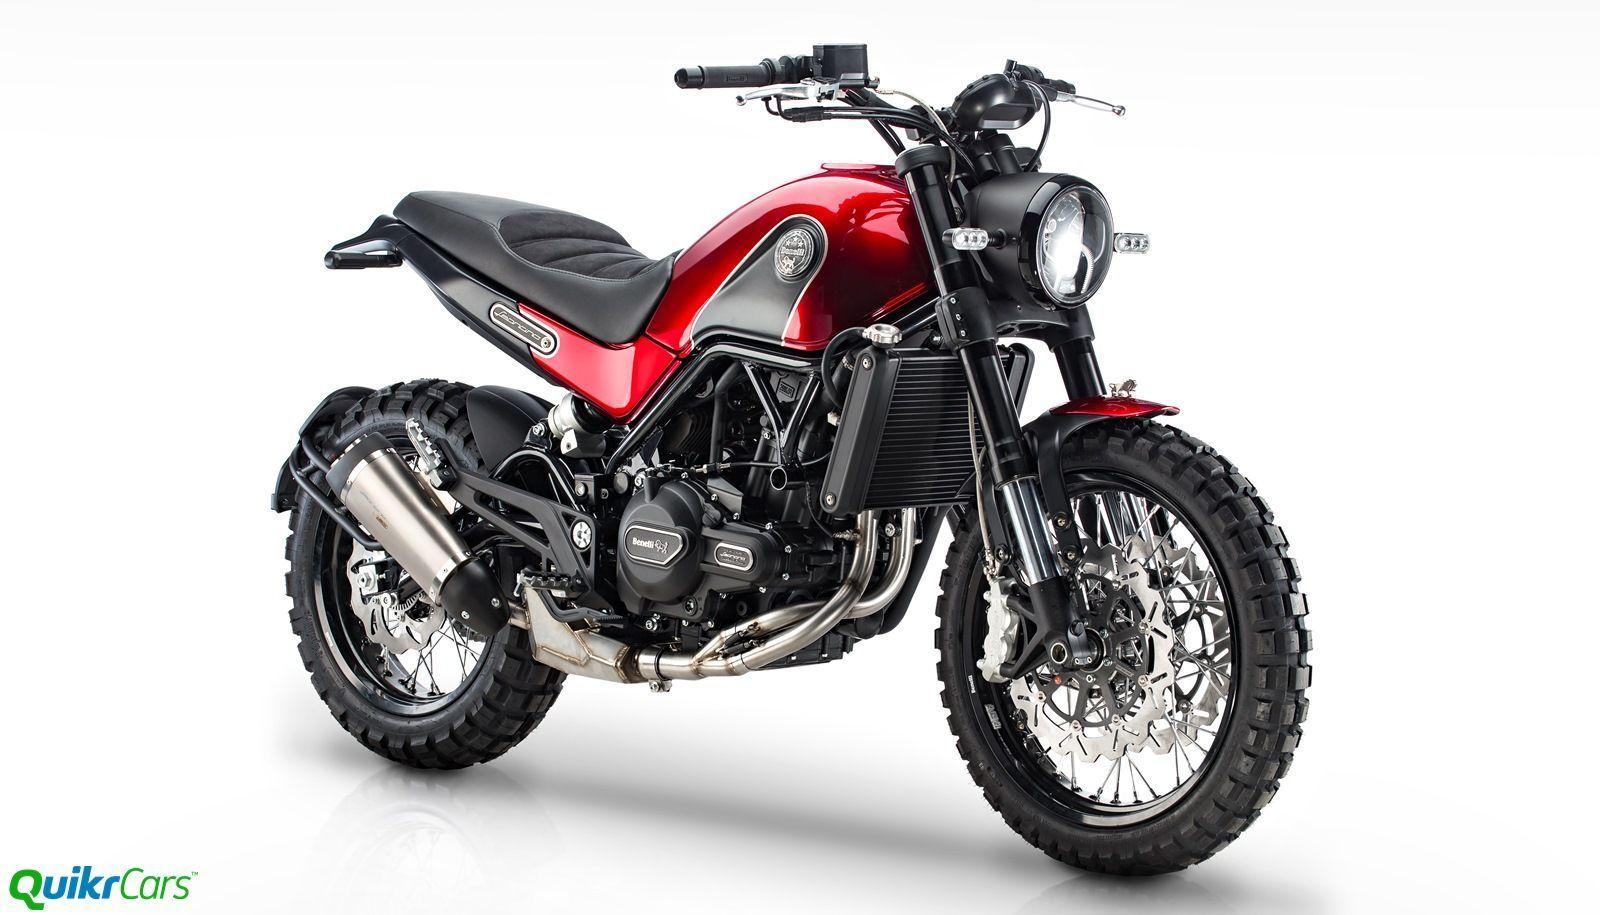 DSK Benelli TNT 400 to Replace the TNT 300